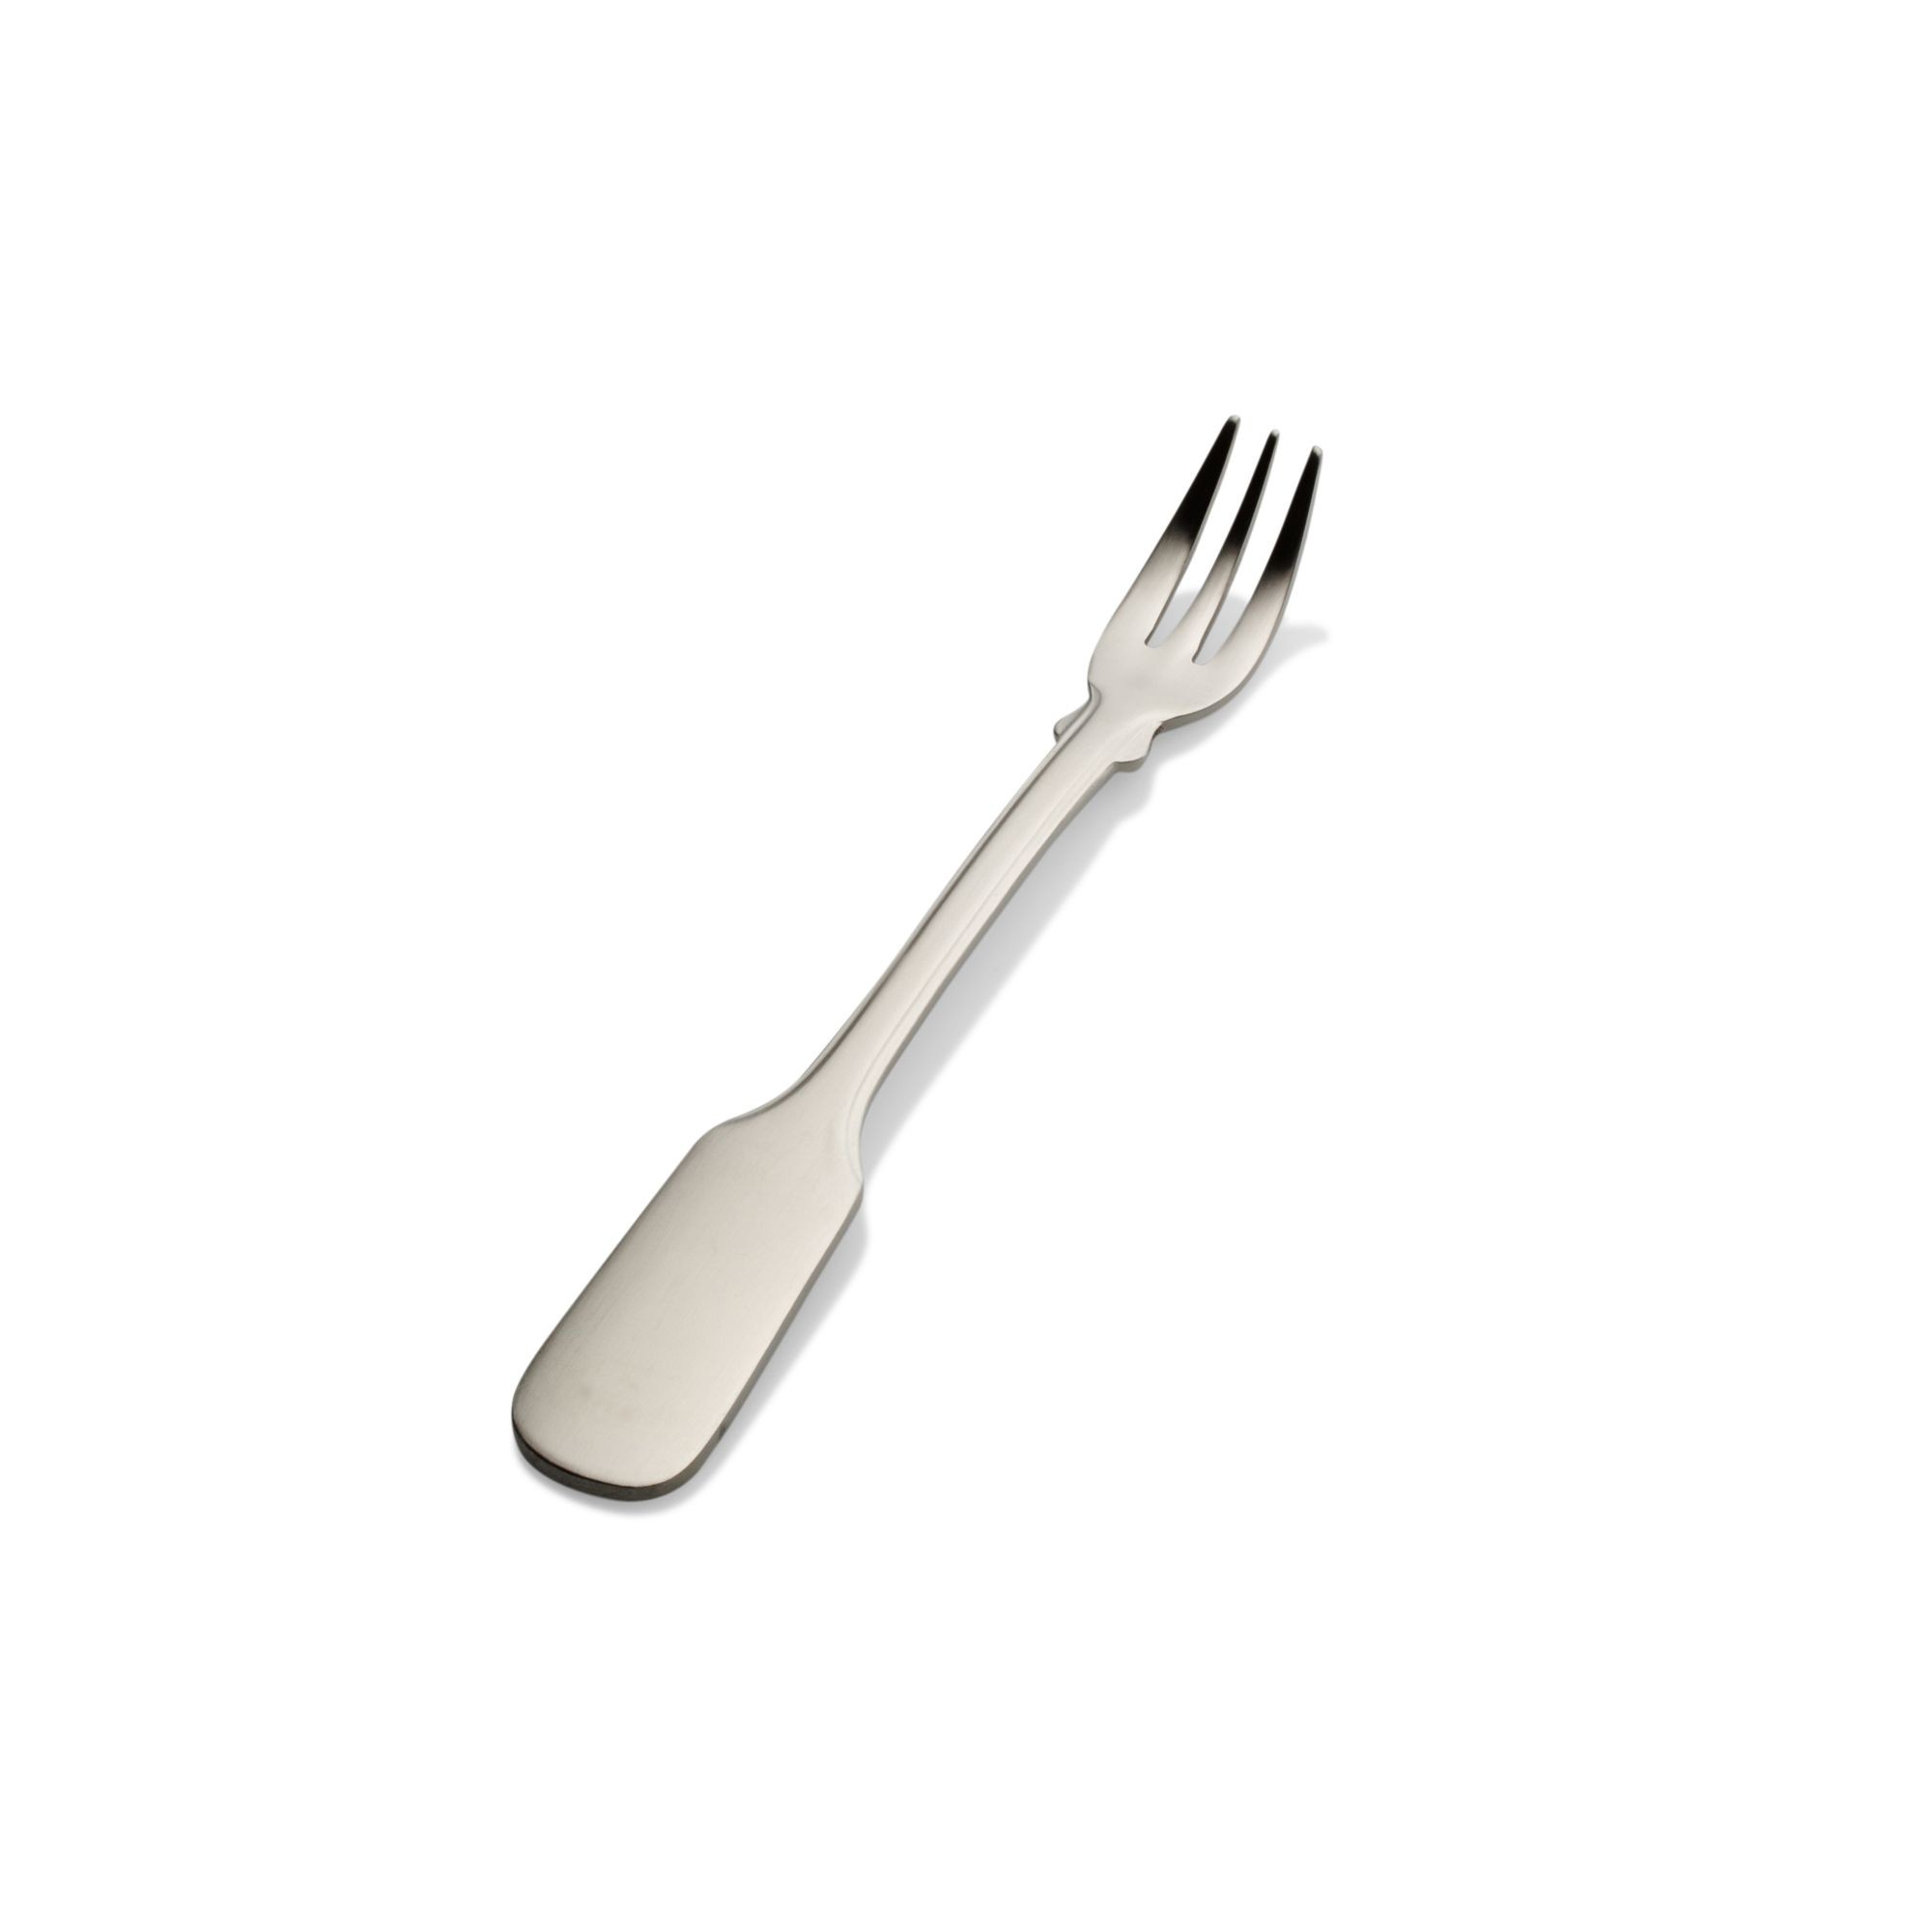 Bon Chef S1908 Liberty 18/8 Stainless Steel Oyster Fork